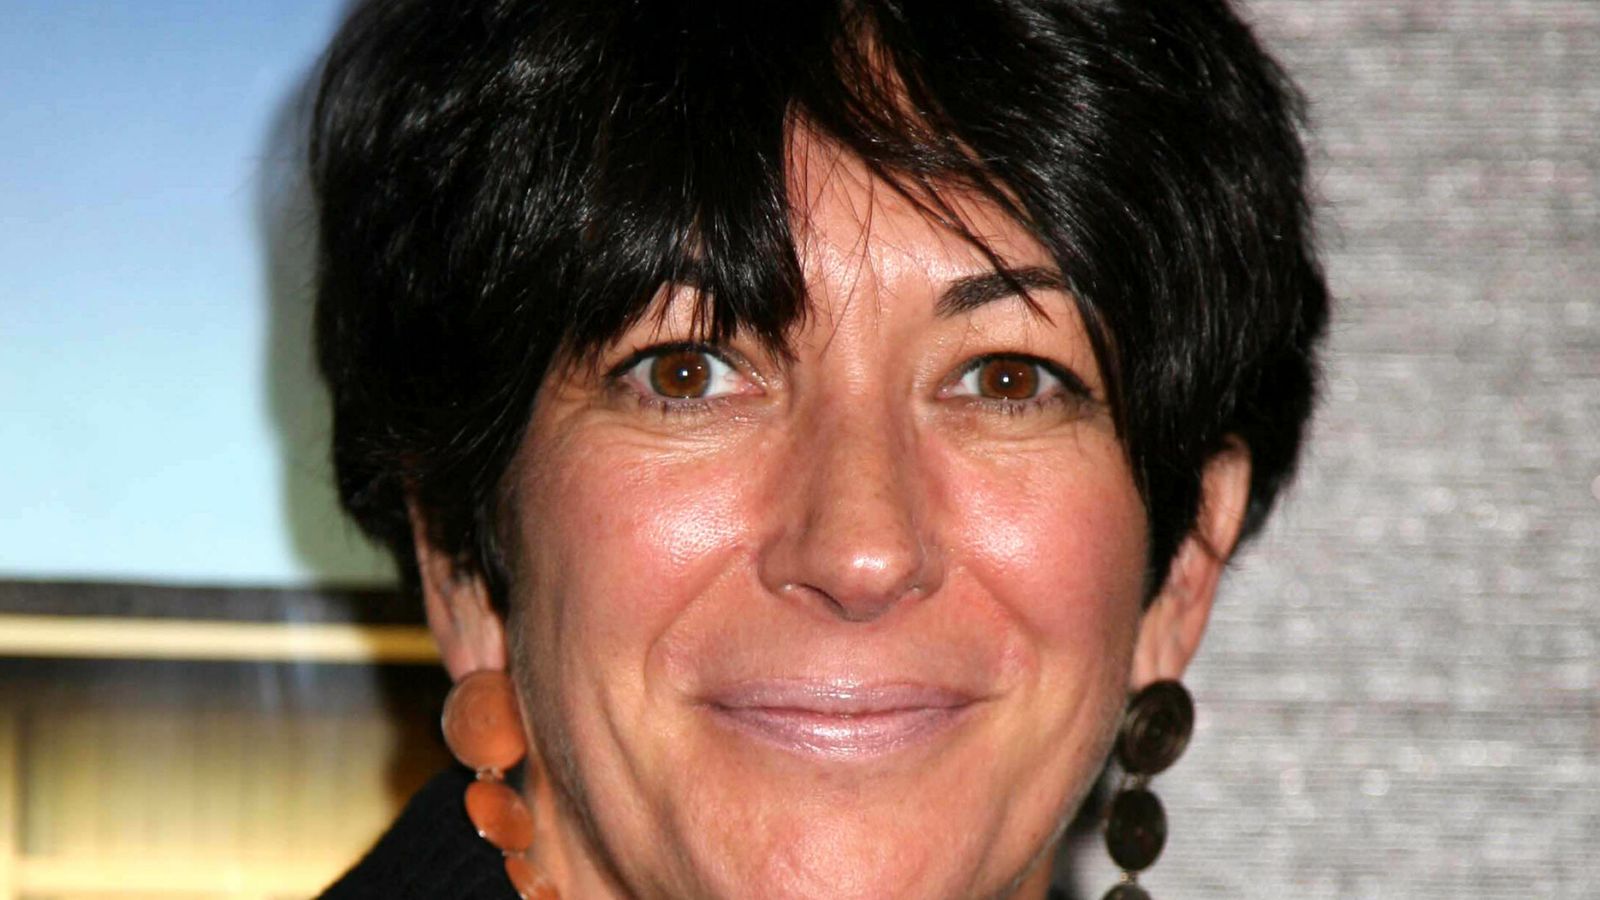 Ghislaine Maxwell trial: Defence calls for retrial after juror says he was a 'victim of sexual abuse'